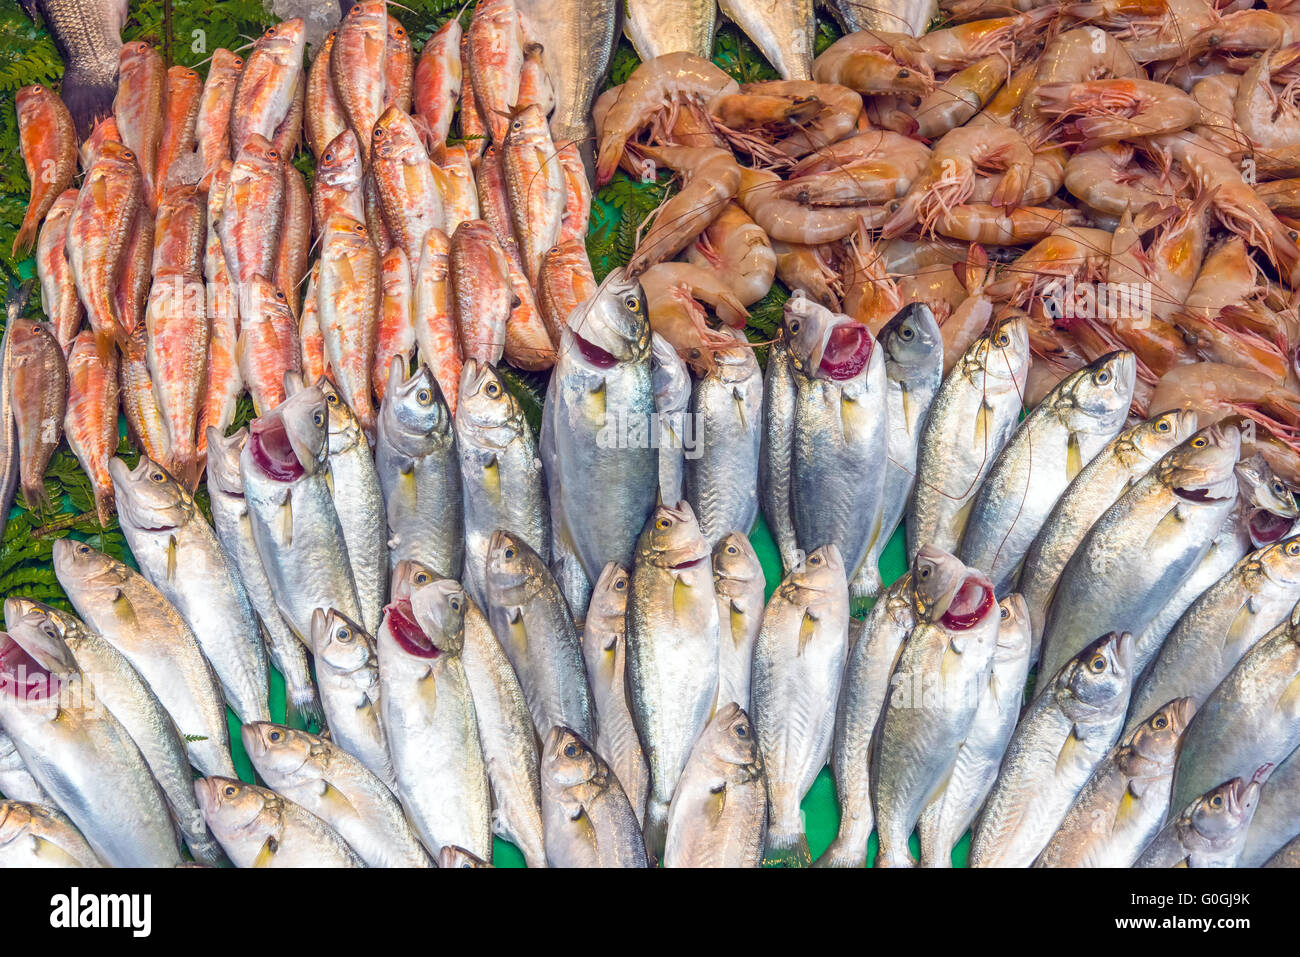 Fresh fish for sale seen at a market in Istanbul Stock Photo